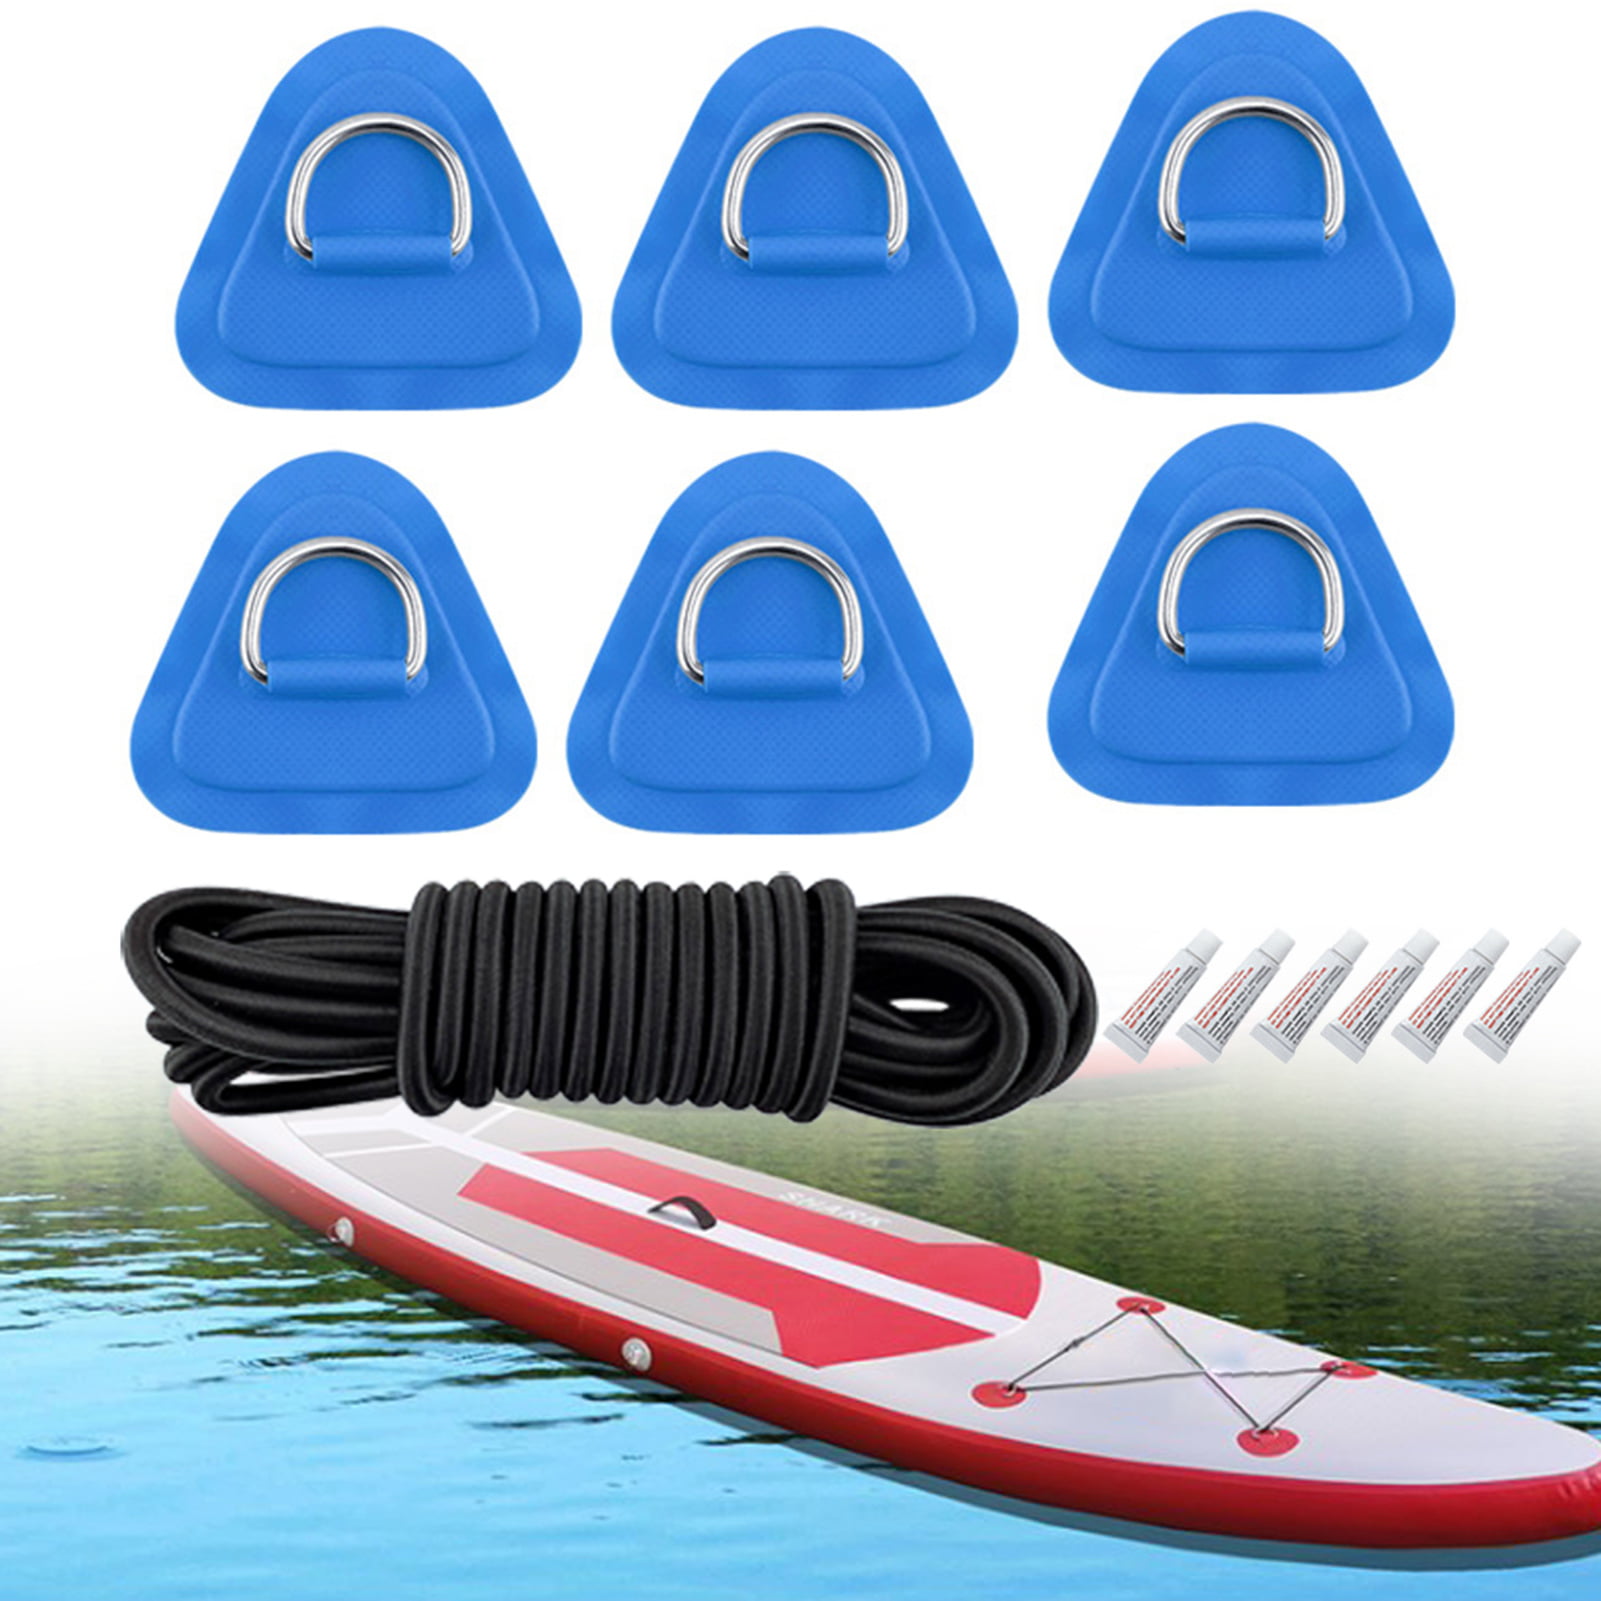 Replacement 6x Kayak D-Ring Patch/Pad & Elastic Rope Set for PVC Inflatable Boat 